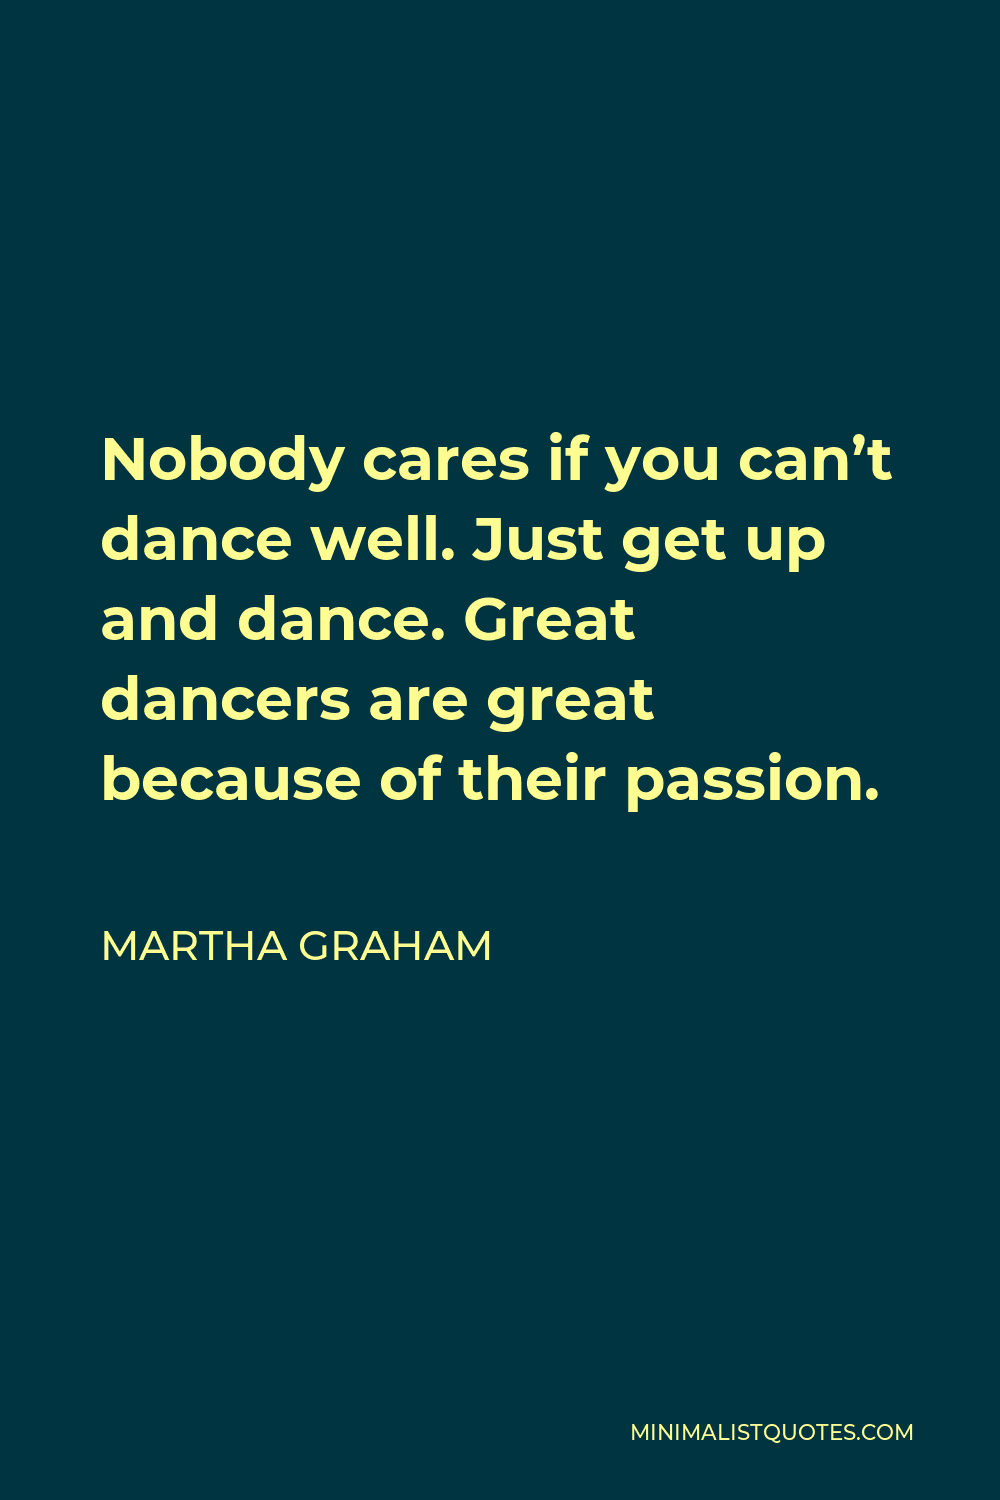 Martha Graham Quote - Nobody cares if you can’t dance well. Just get up and dance. Great dancers are great because of their passion.